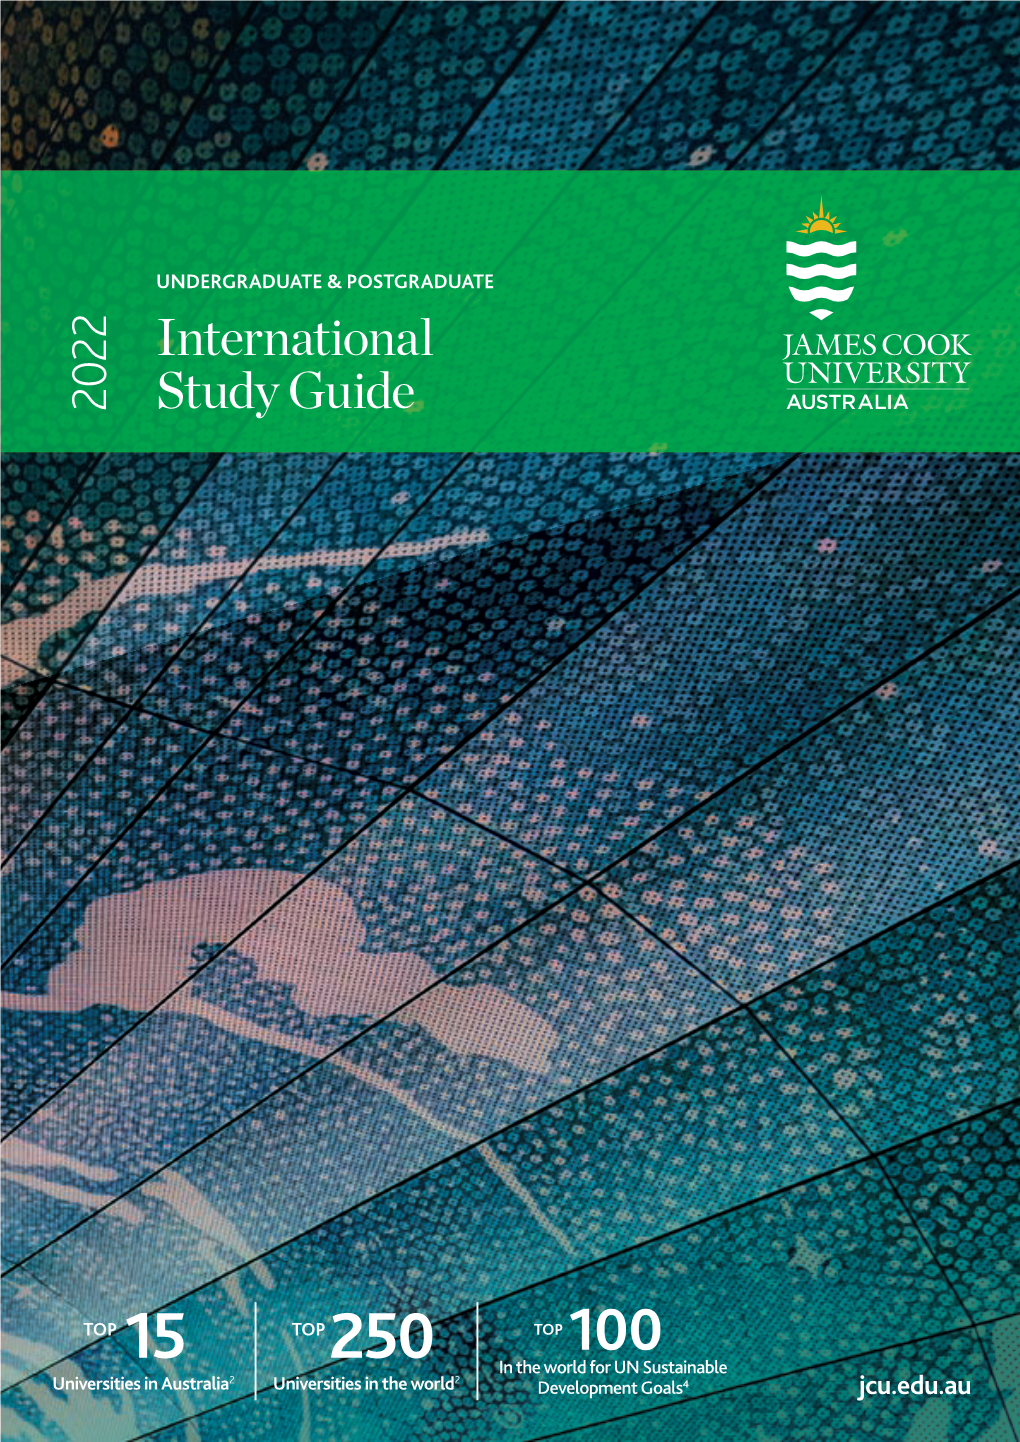 2022 International Study Guide Is Published by Marketing, James Cook University, 2021